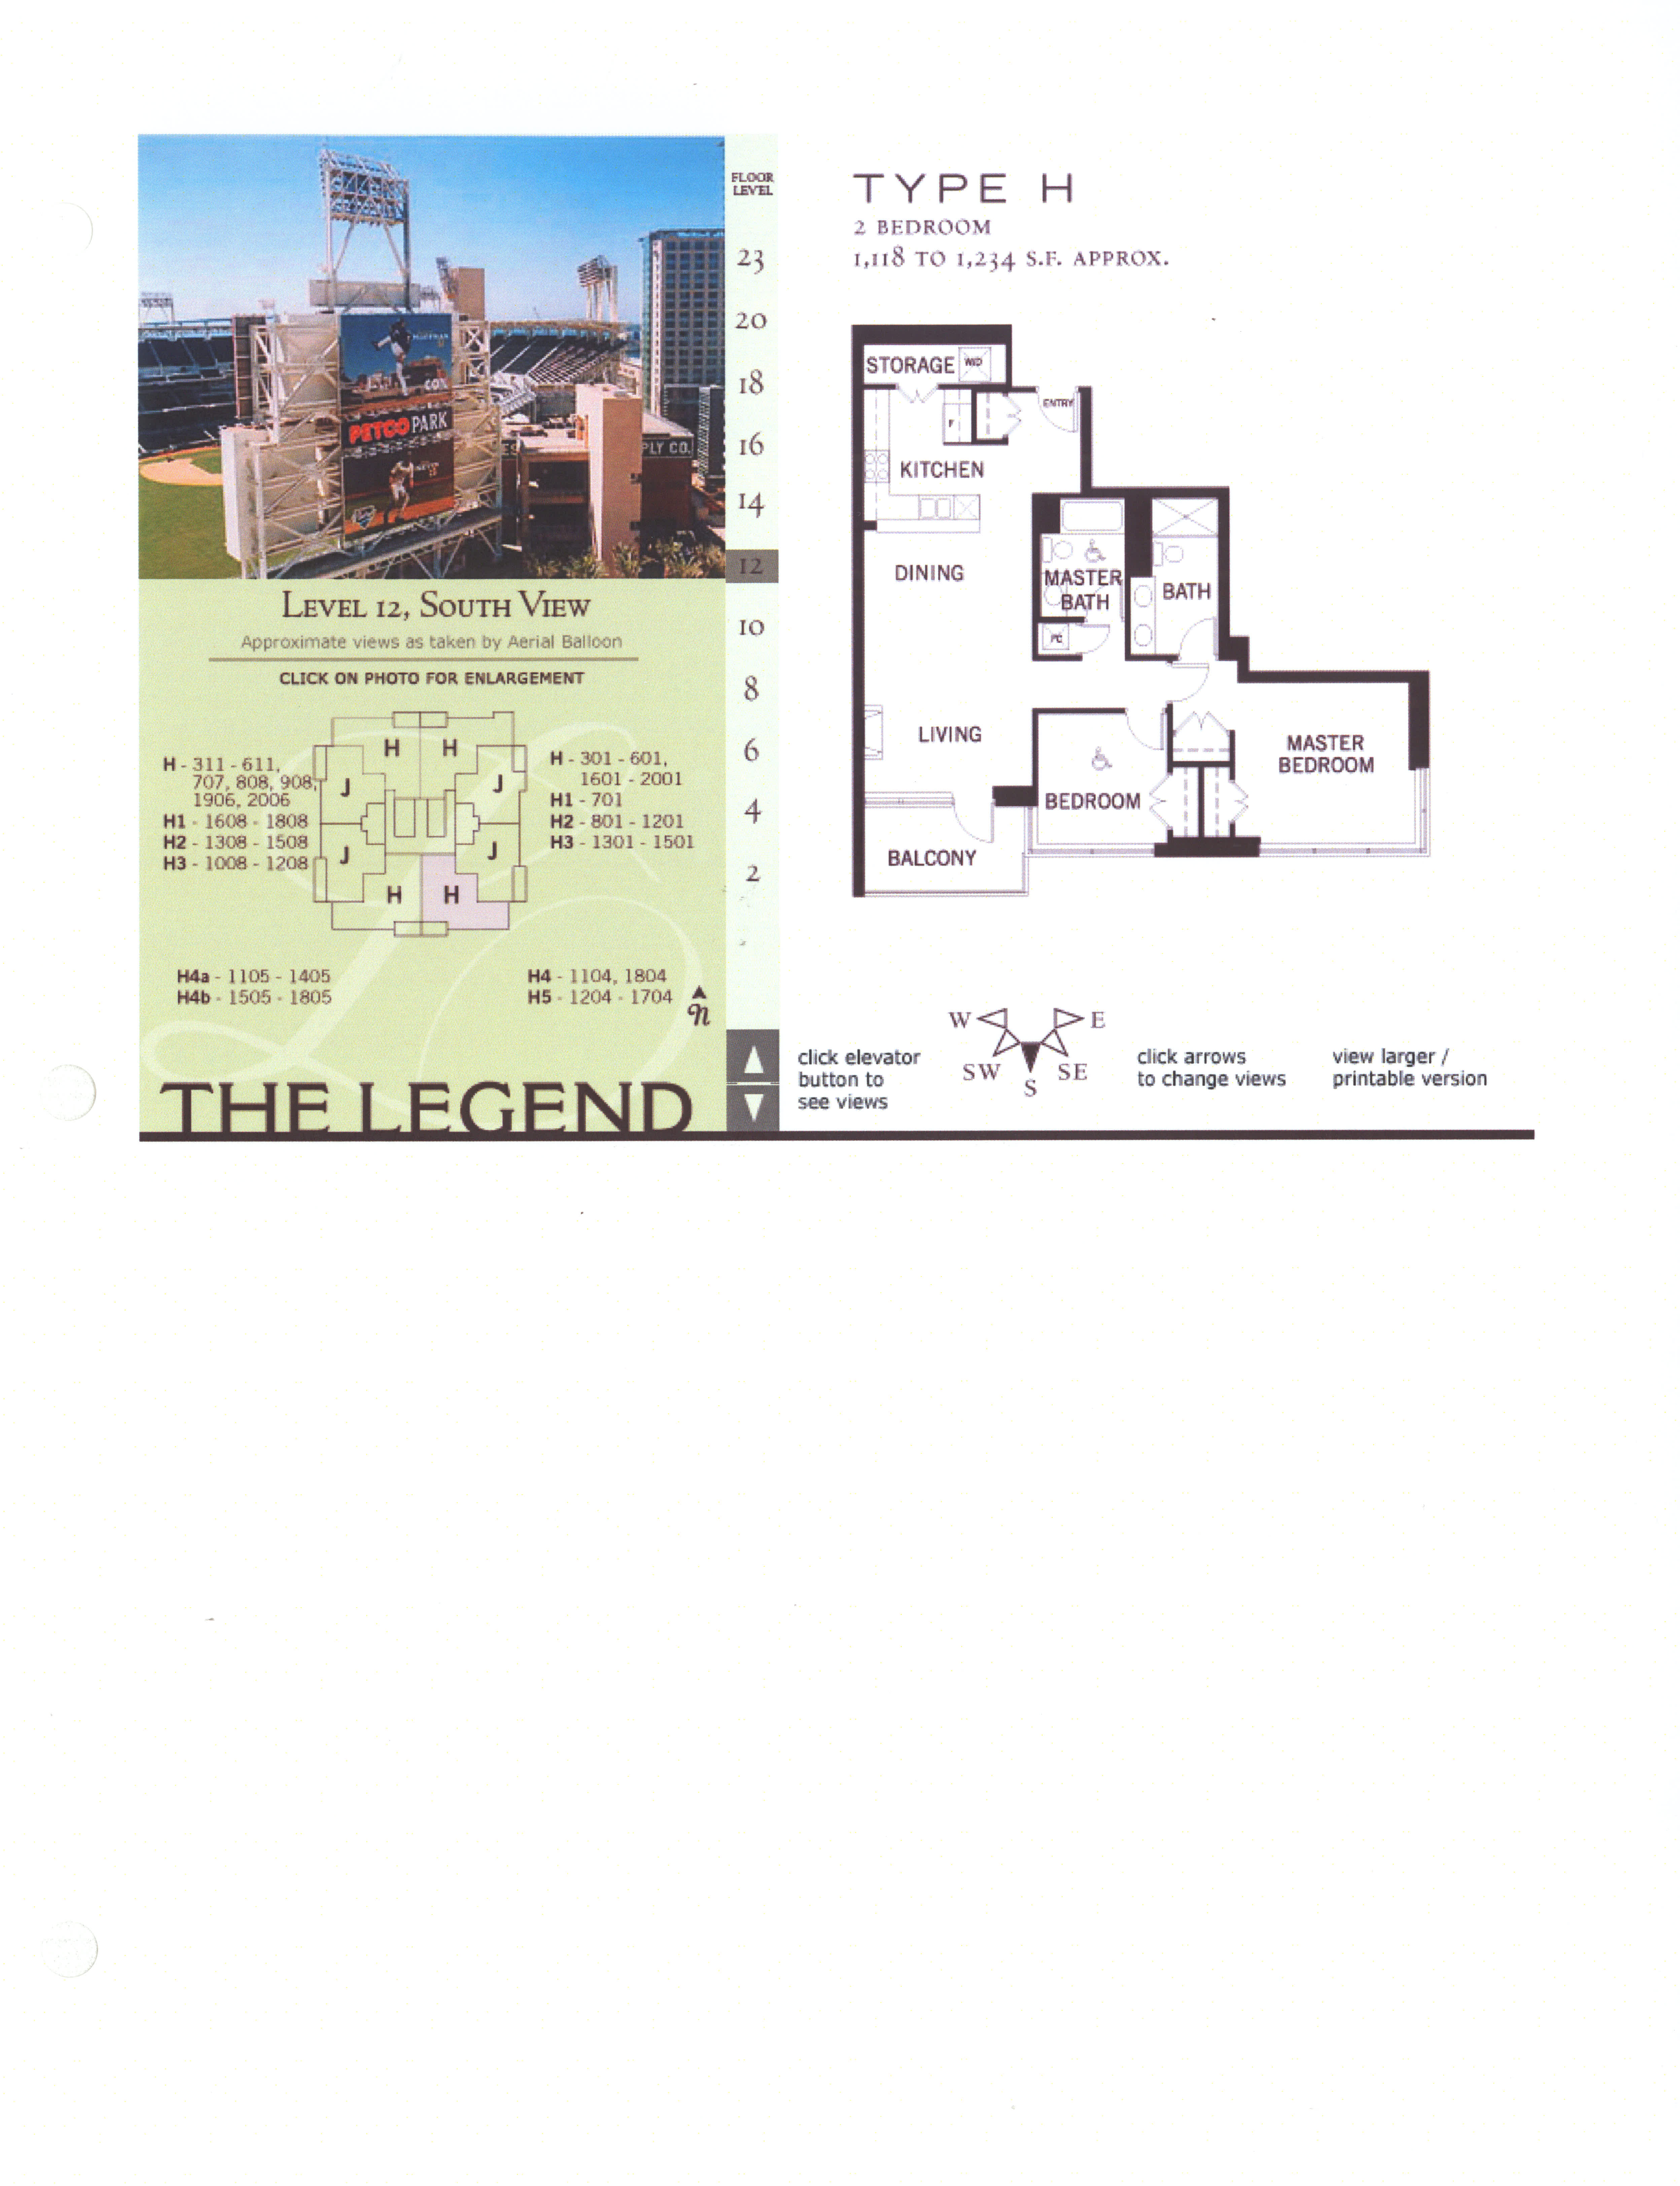 The Legend Floor Plan Level 12, South View – Type H